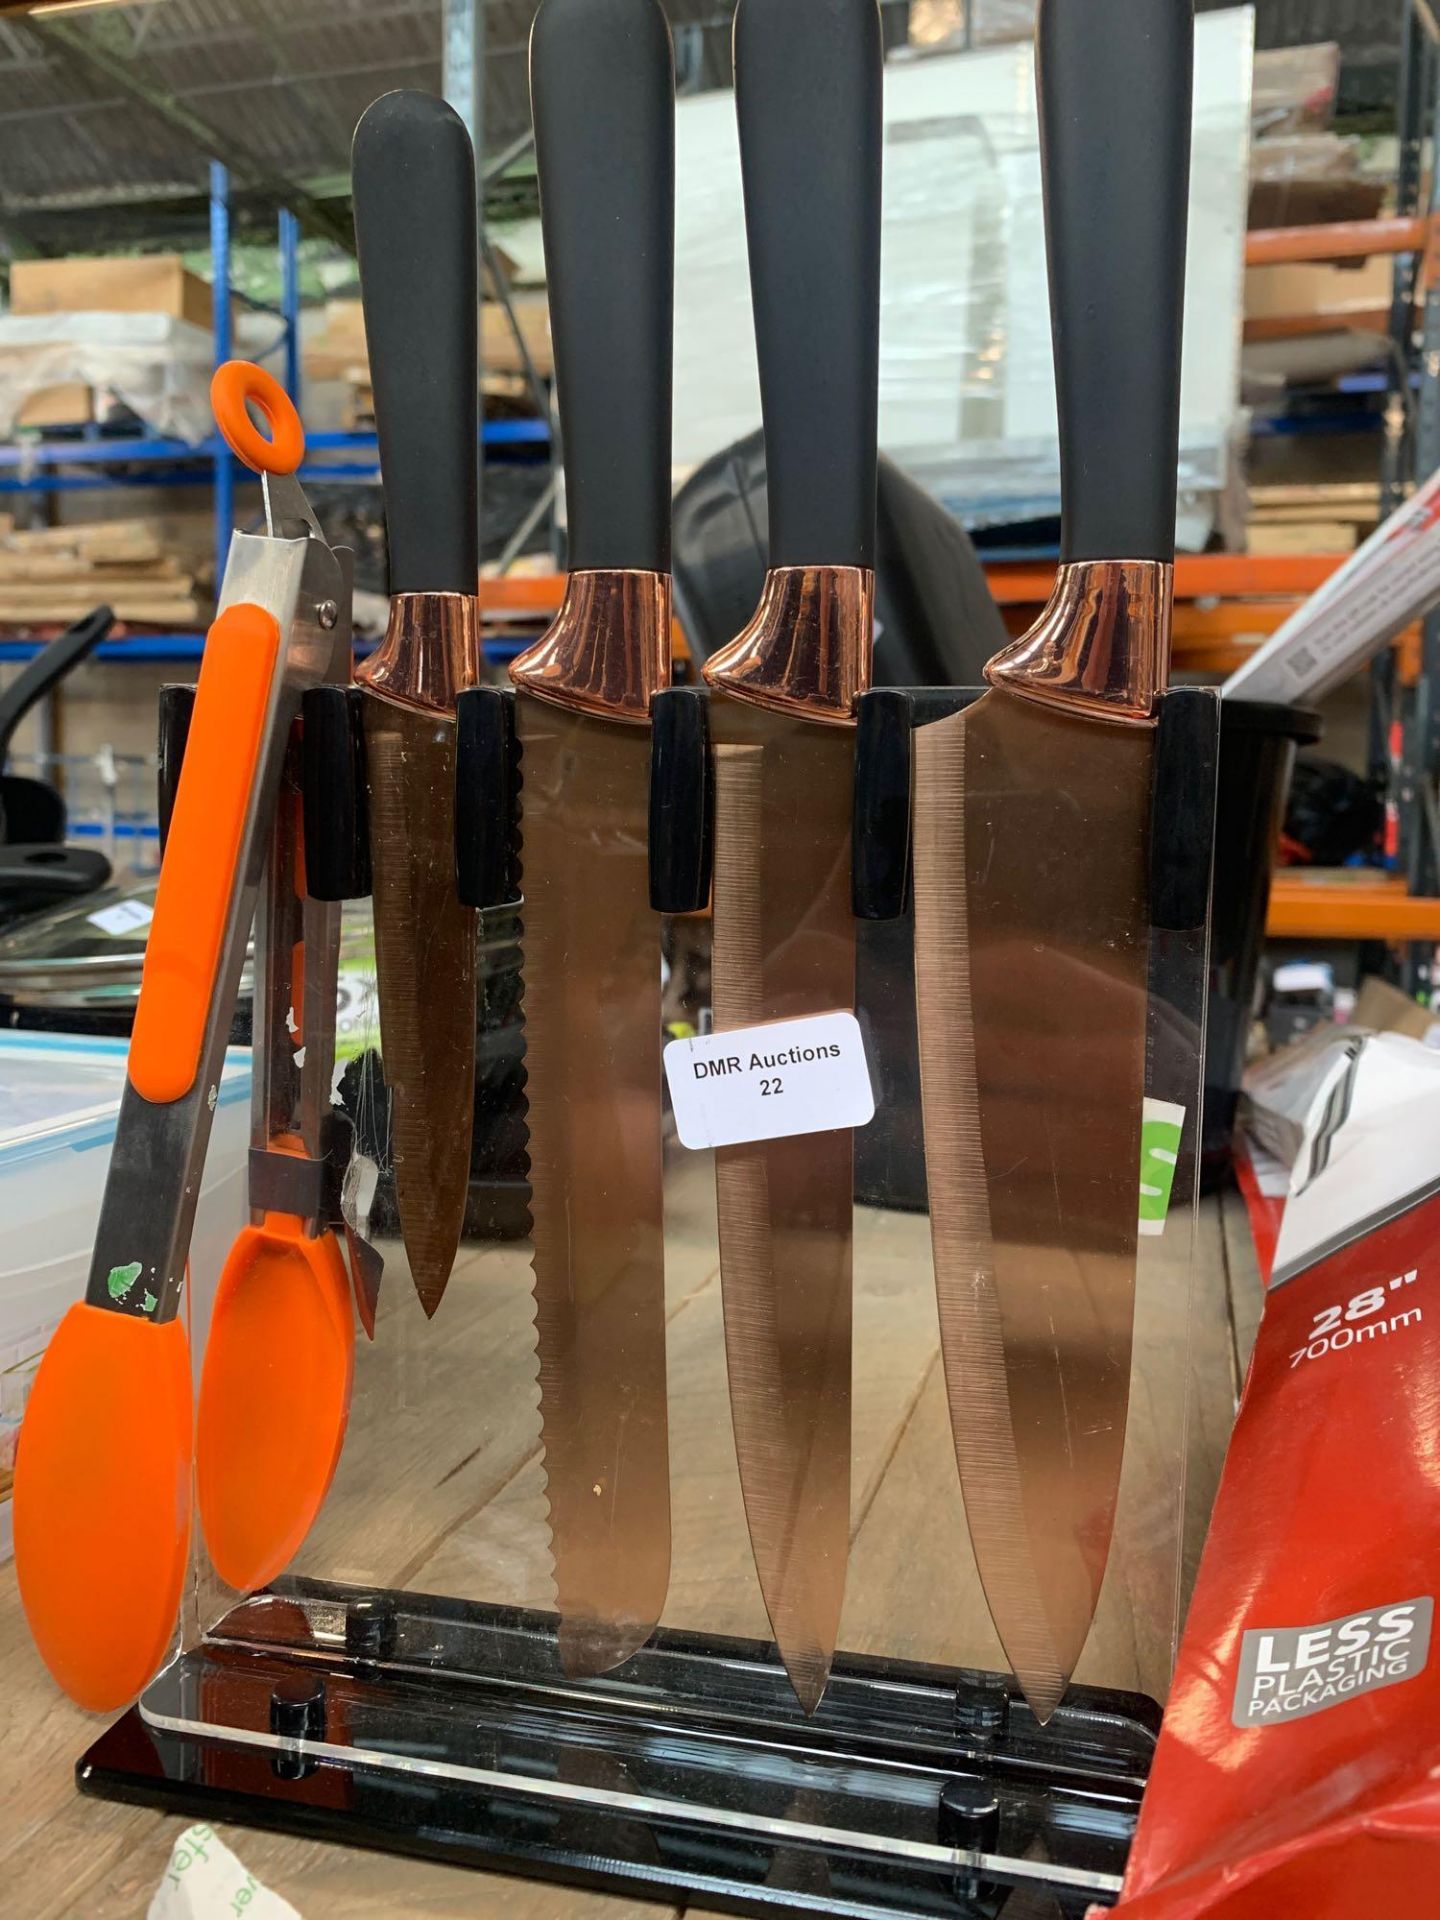 1 LOT TO CONTAIN 1 KNIFE SET 1 KNIFE MISSING & 1 DAMAGED